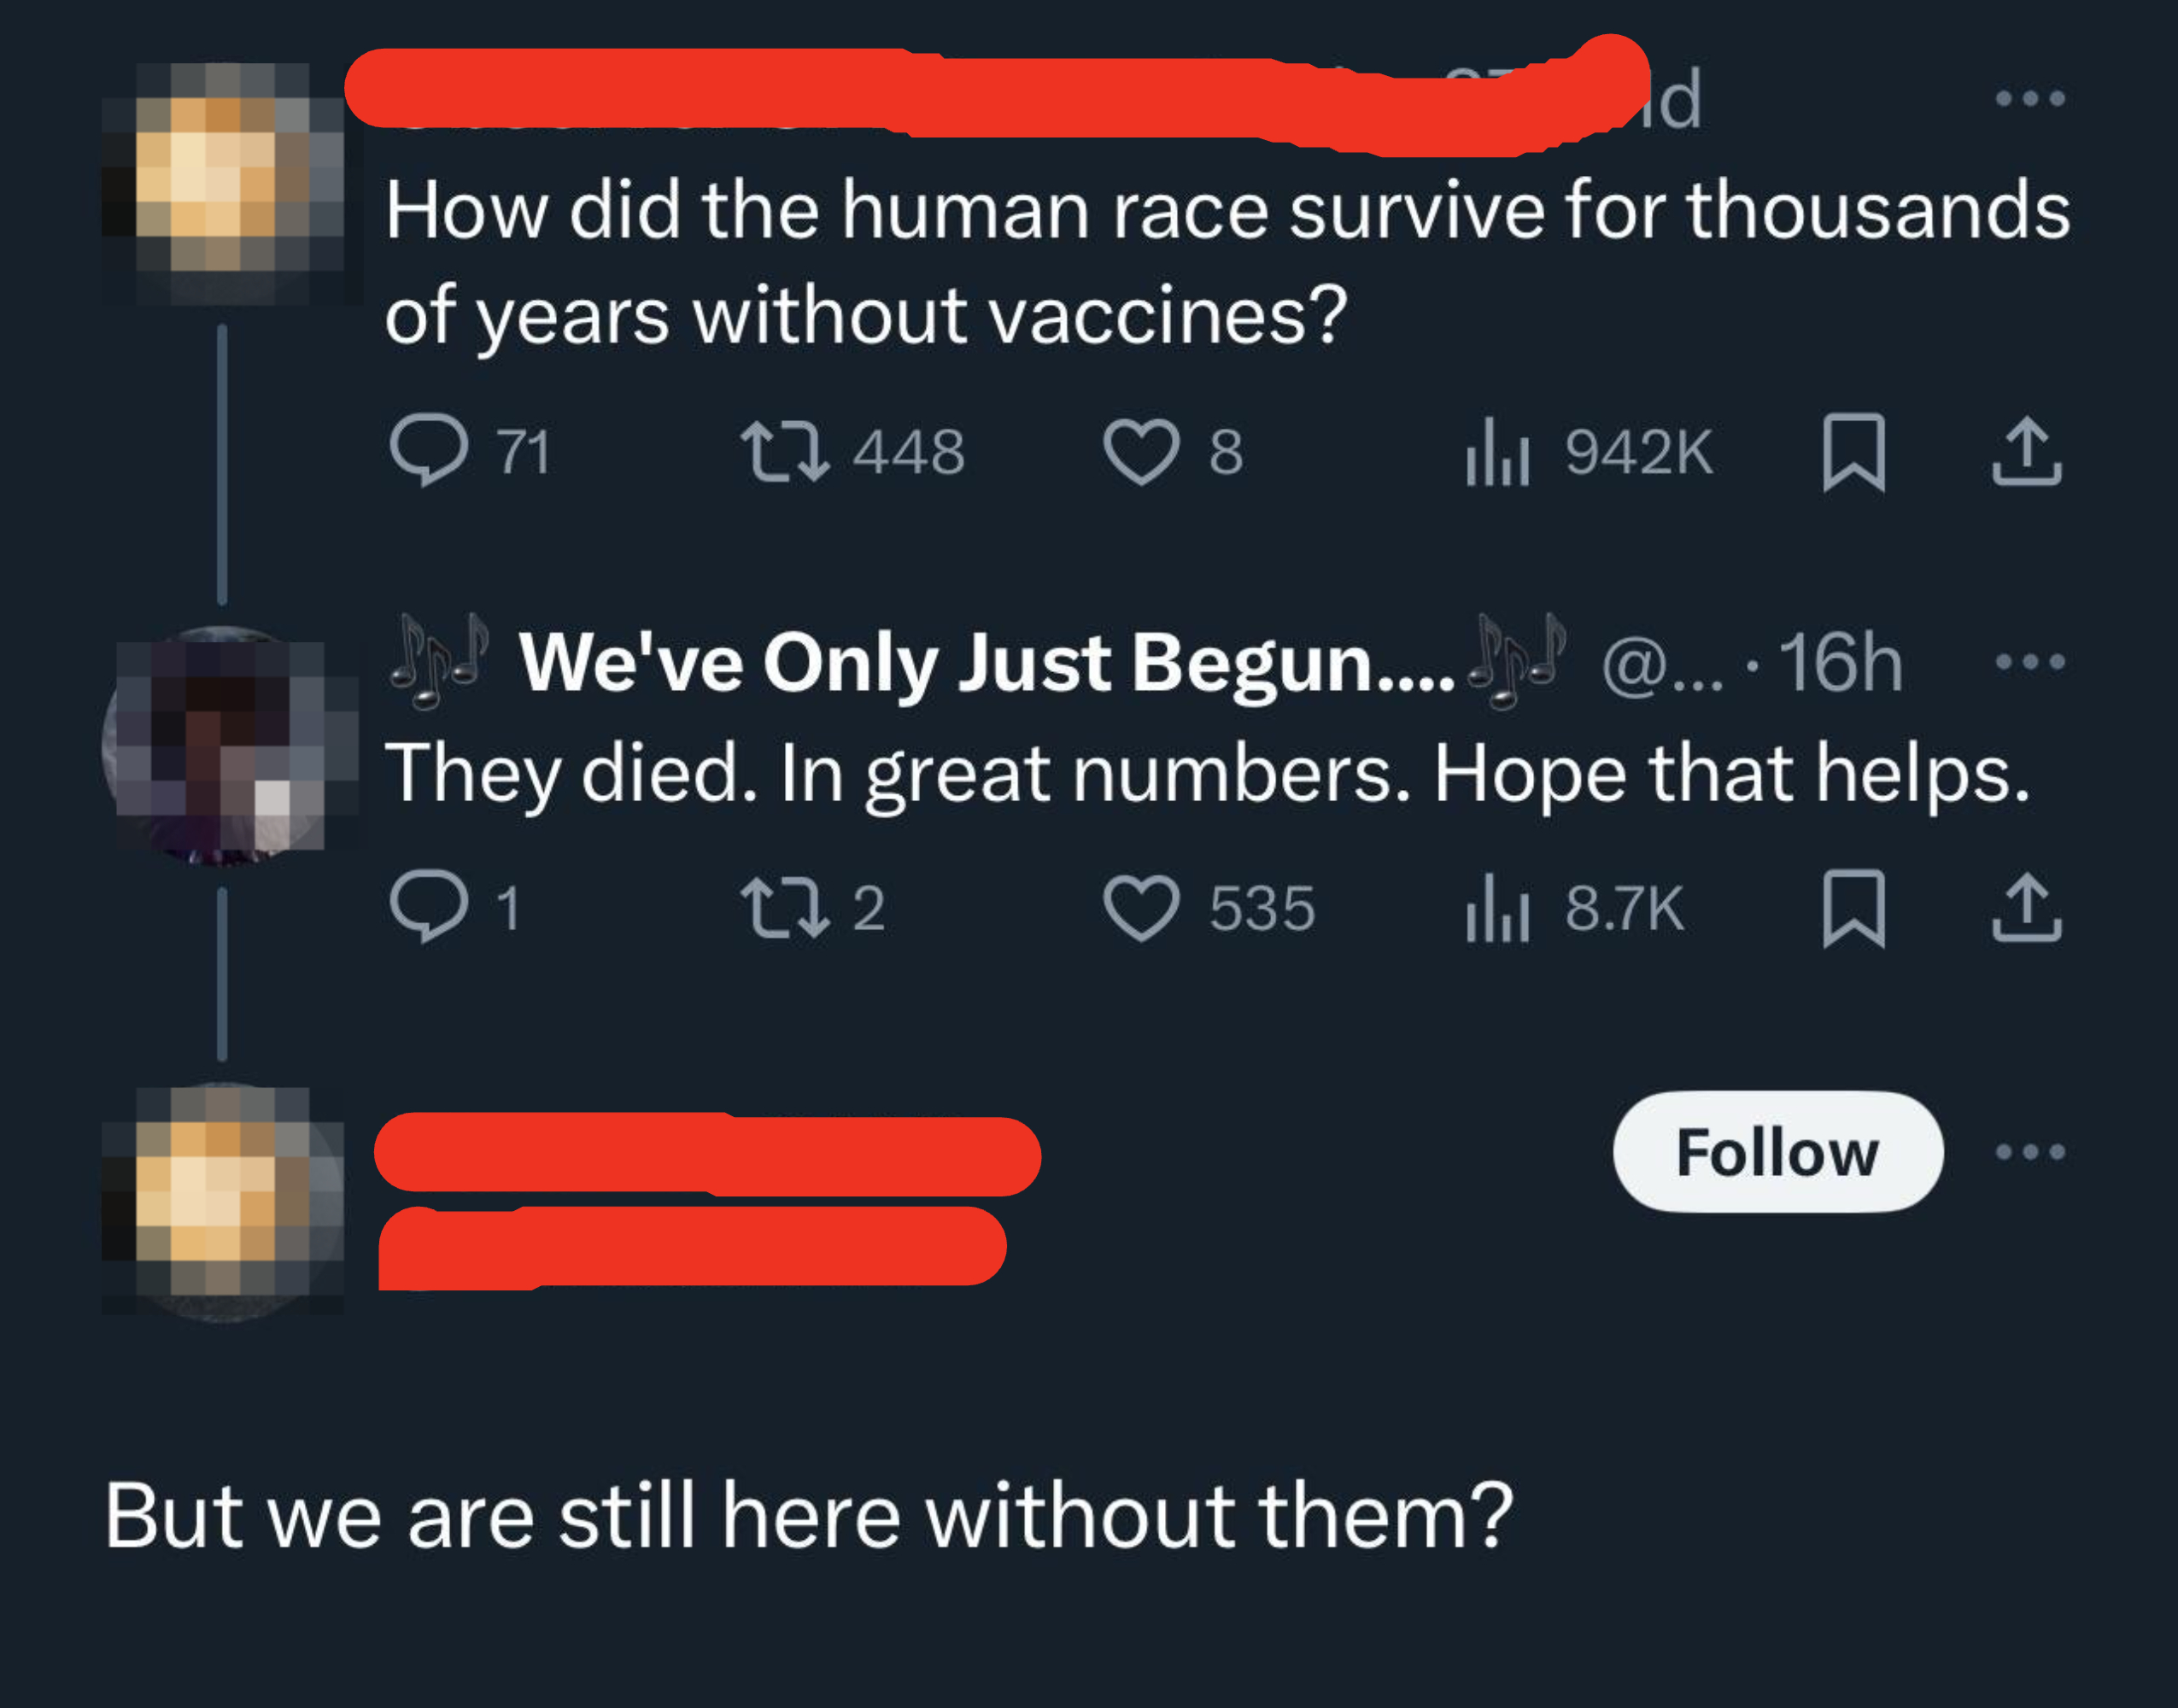 &quot;How did the human race survive for thousands of years without vaccines? &quot;They died, in great numbers,&quot; &quot;But we are still here without them?&quot;